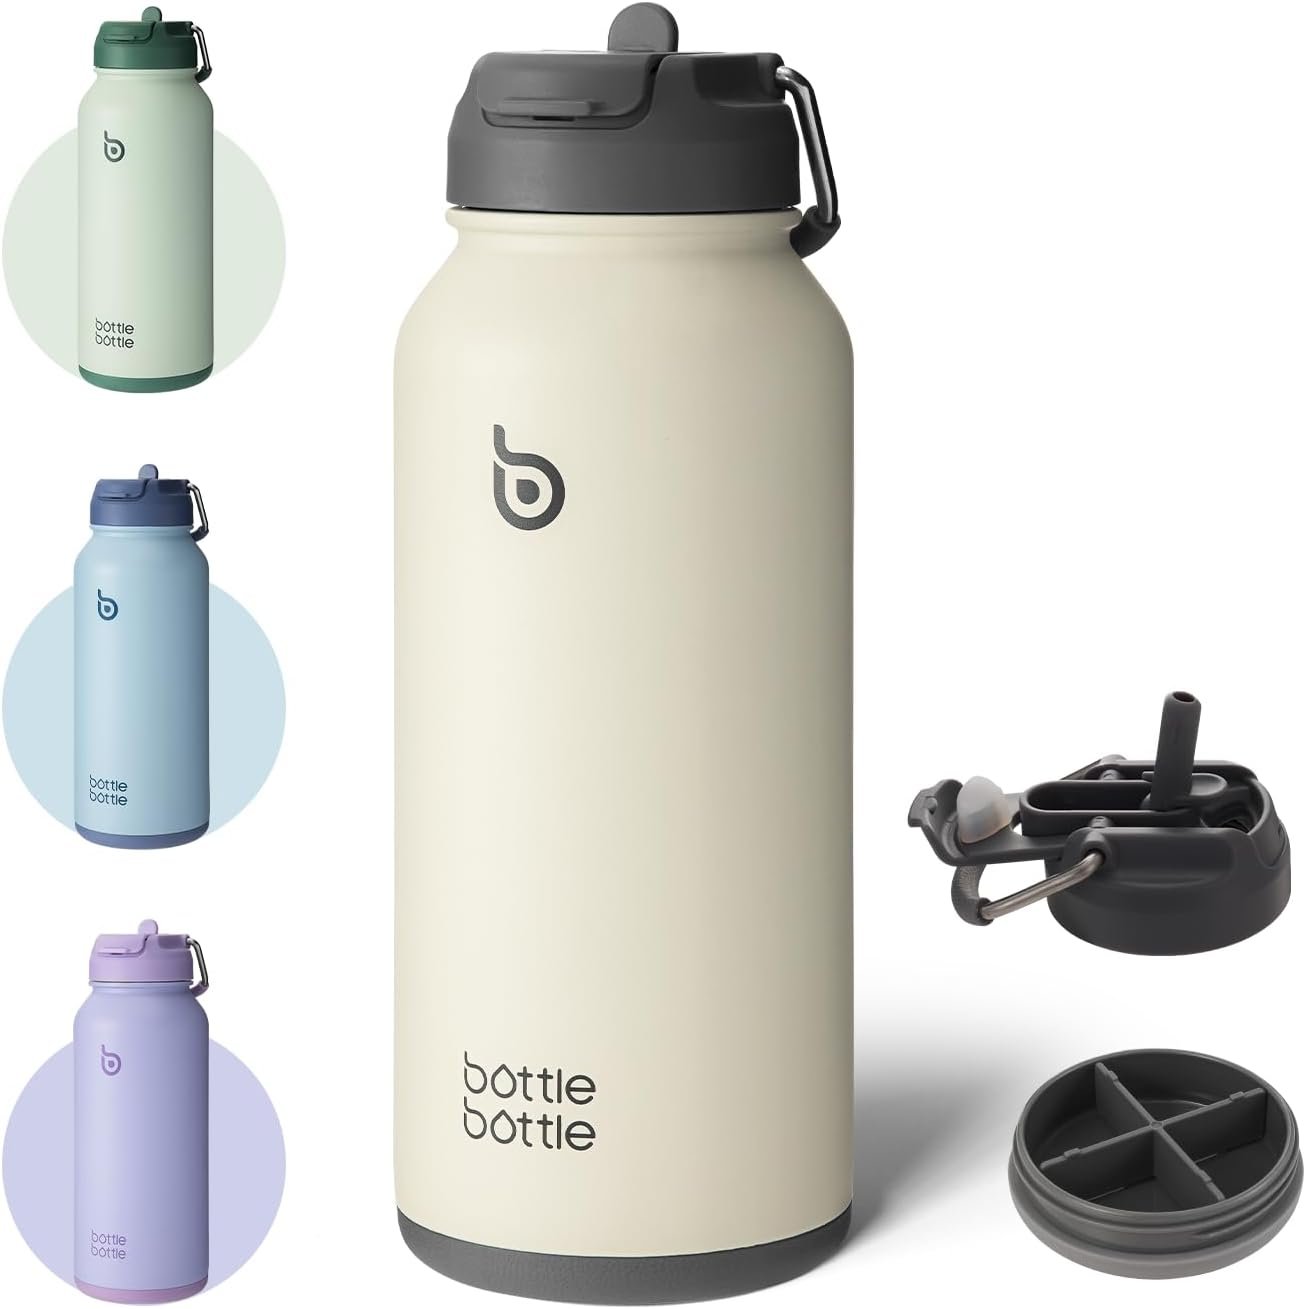 BOTTLE BOTTLE 32oz Insulated Water Bottle Stainless Steel Sport Water Bottle with Straw Dual-use Lid Design for Gym with Pill Box (gray)